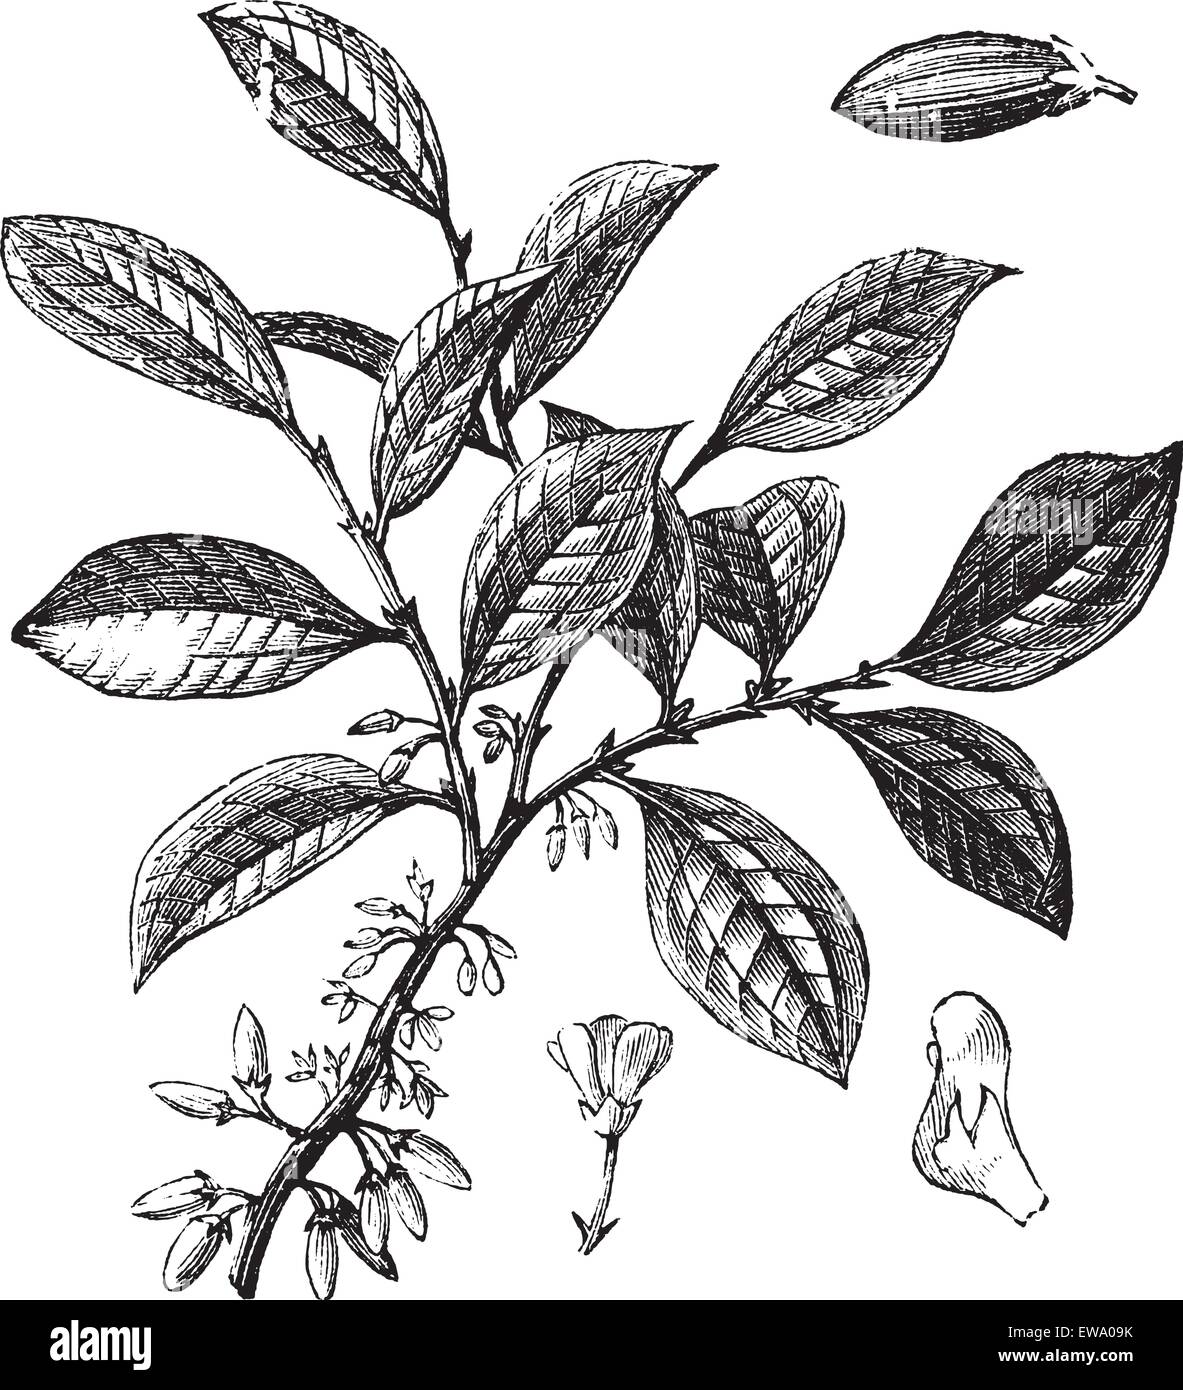 Cocaine or Coca or Erythroxylum coca, vintage engraving. Old engraved illustration of a Cocaine plant showing flowers. Stock Vector